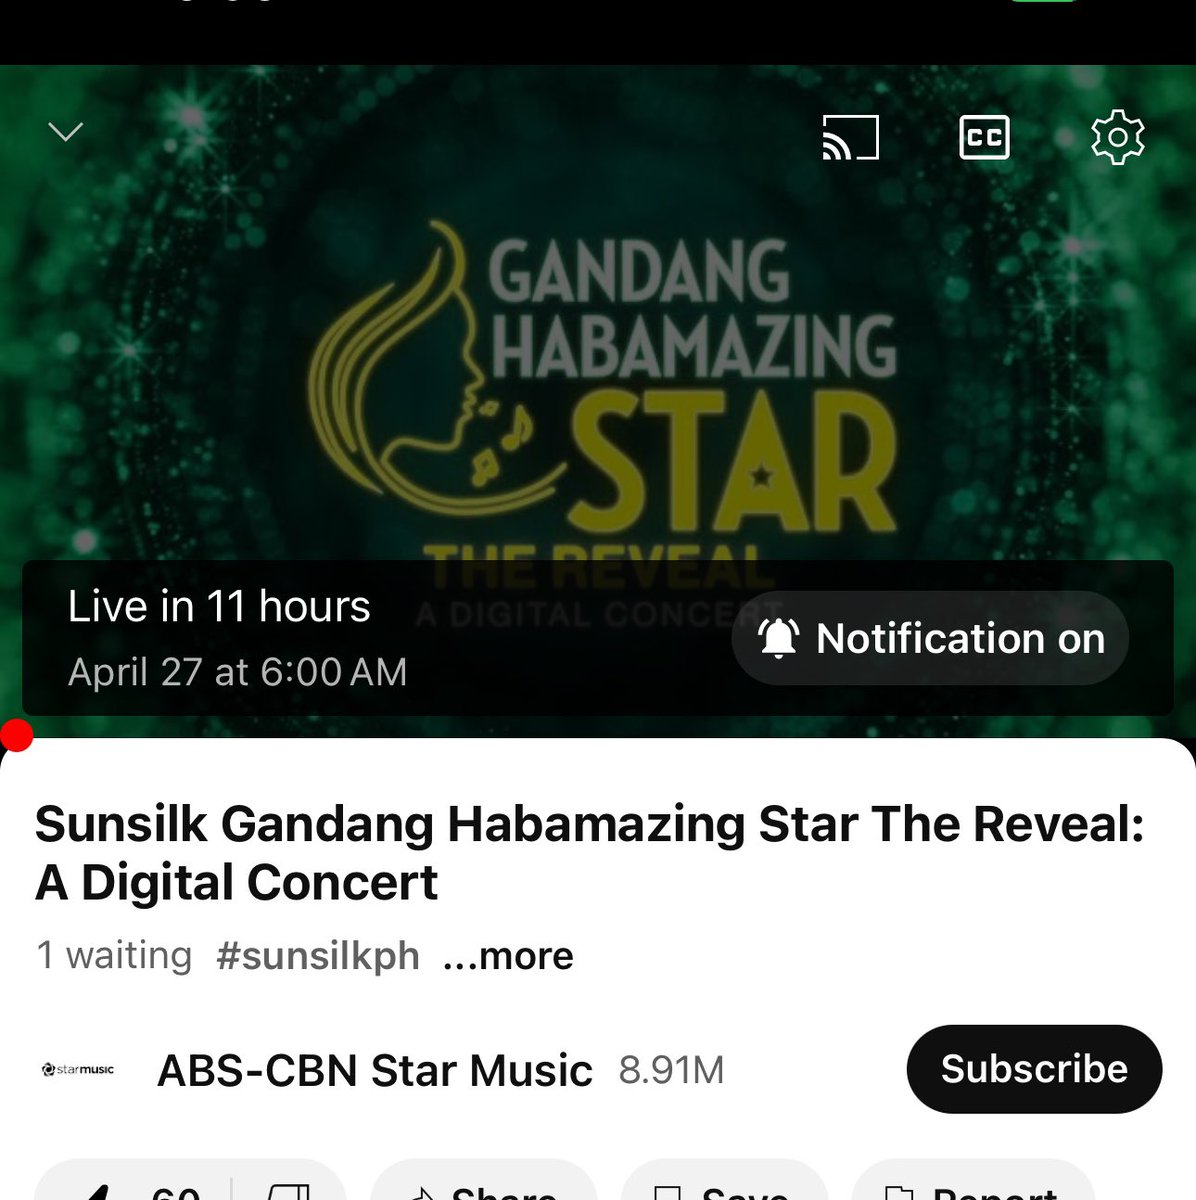 Notification ON! 🔔📳 🙌🏼

Let’s all WATCH and have a great time with our amazing best girl #BelleMariano 🎙️💃🏻🎶✨
@SunsilkPH #GandangHABAmazing 

You’ll do amazing, @bellemariano02 💚💚💚 !!  Excited for this!! 

youtube.com/live/c3aQe9AZK…